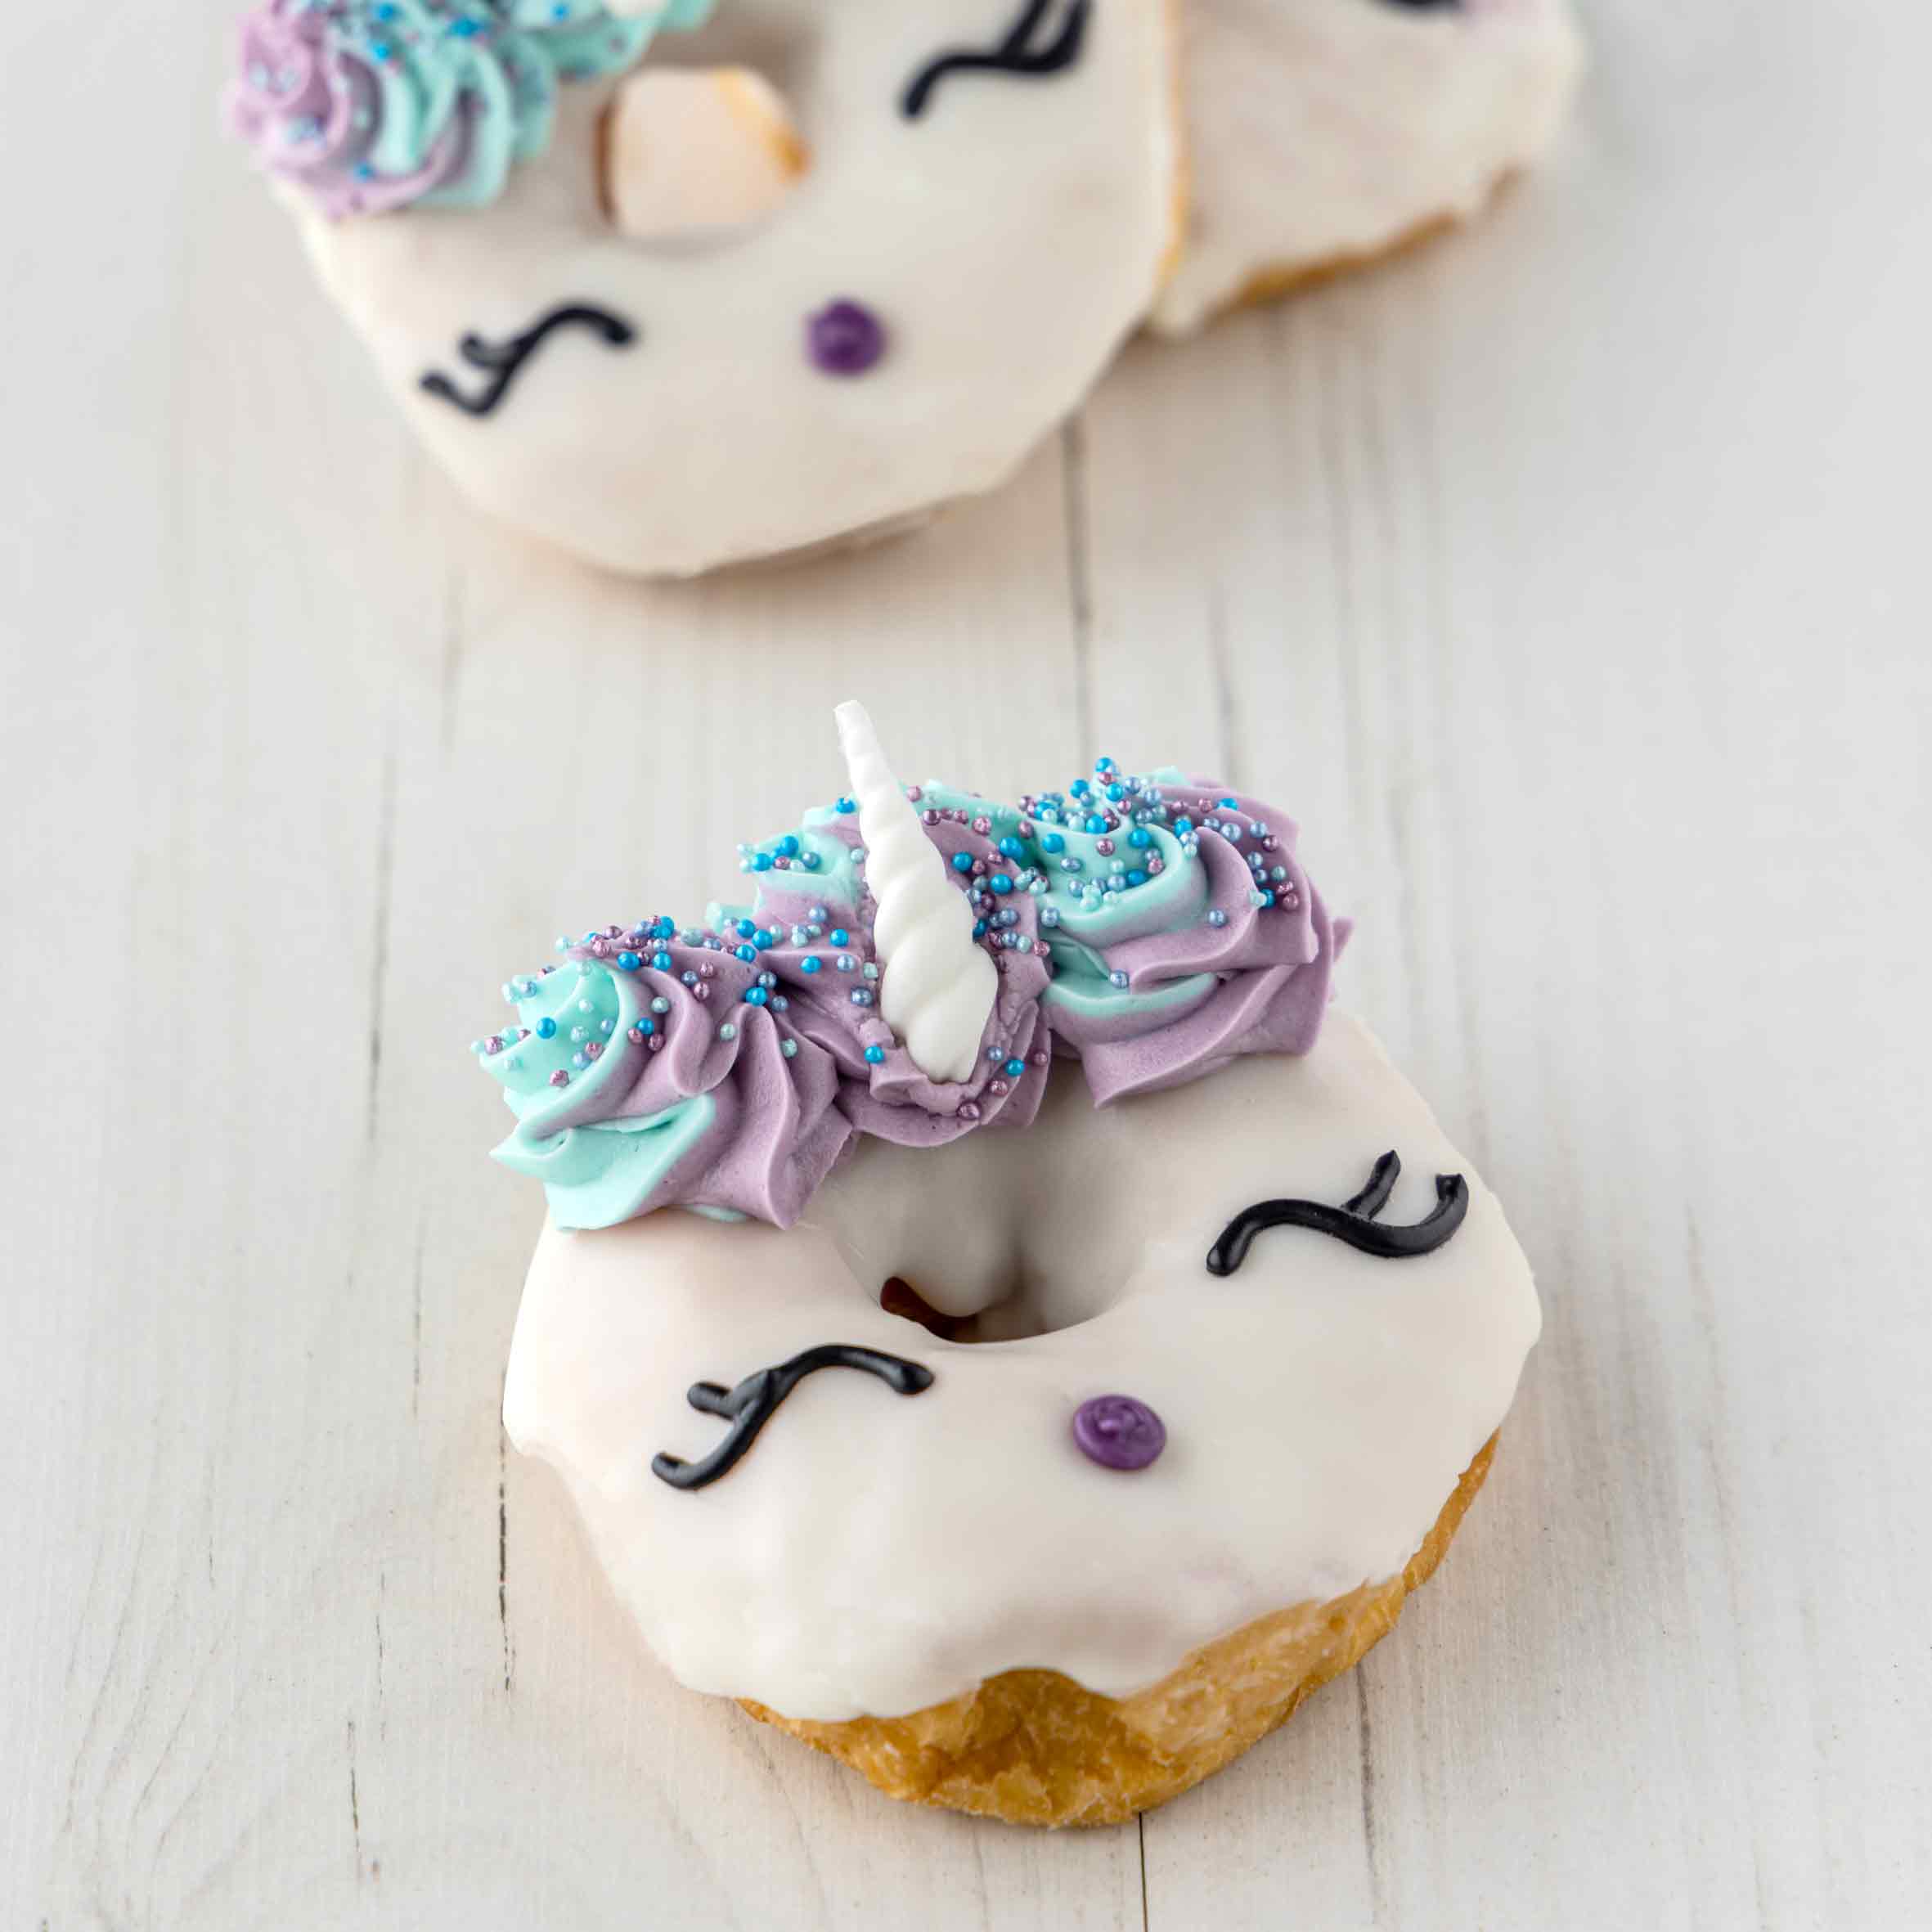 Little Mermaid themed donuts